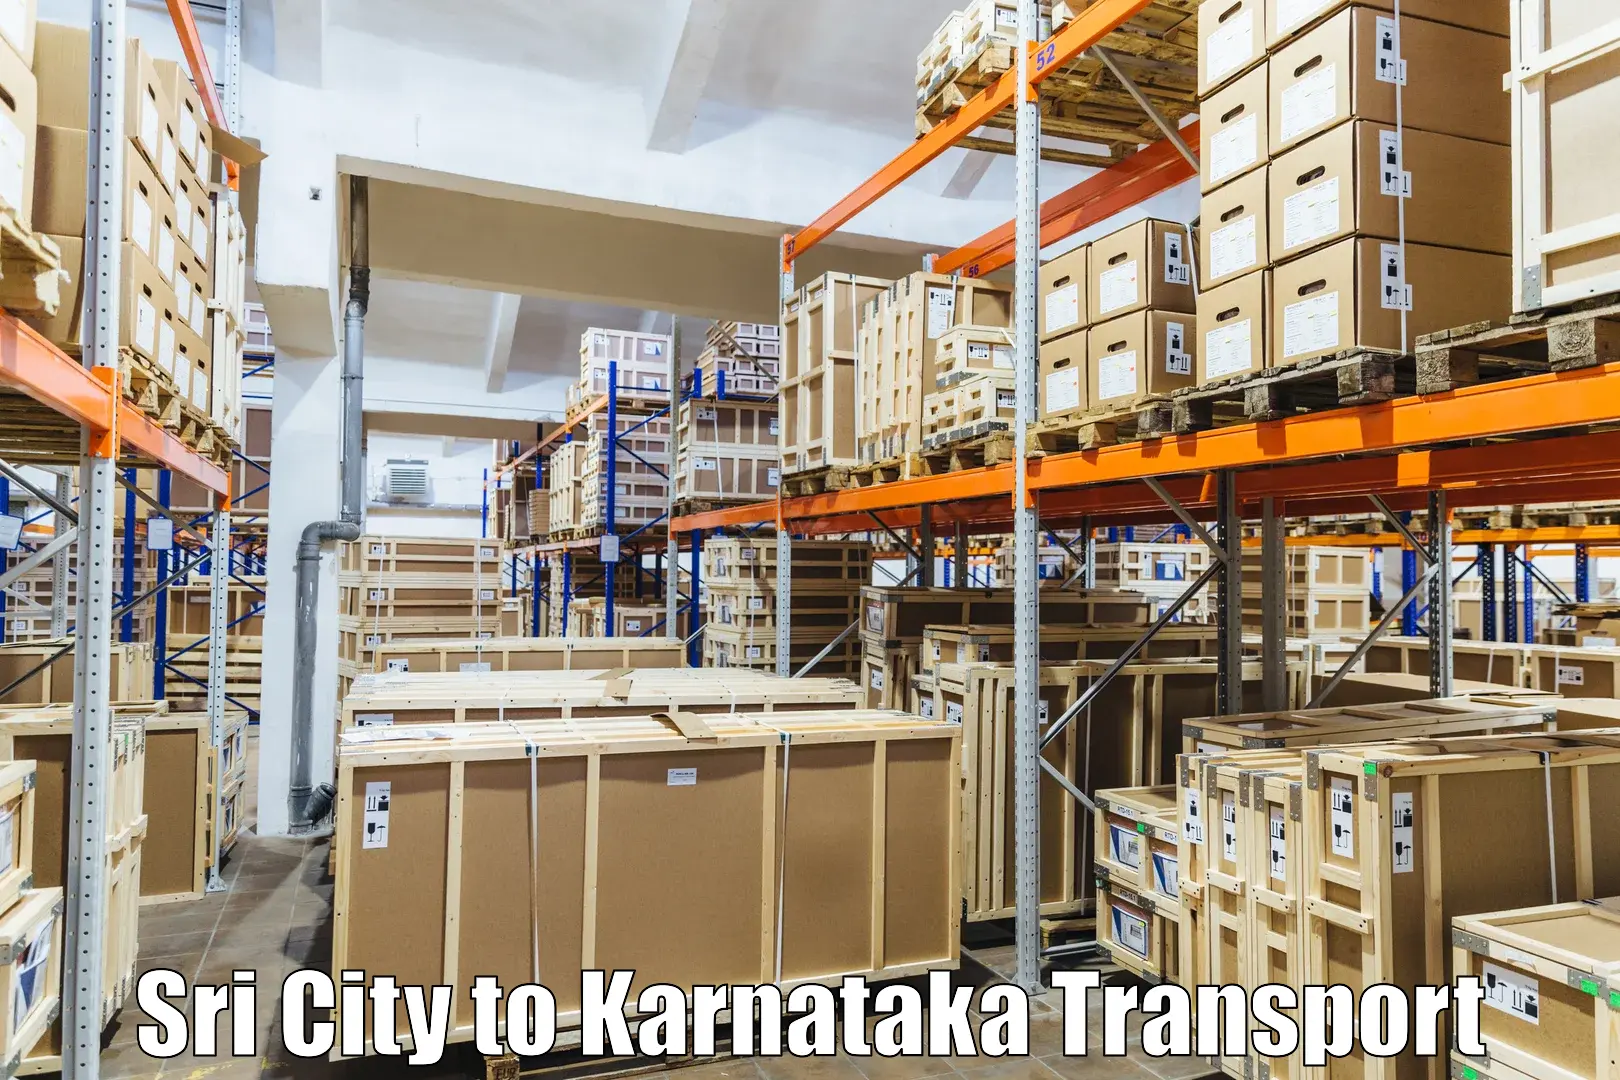 Transport bike from one state to another Sri City to Karkala